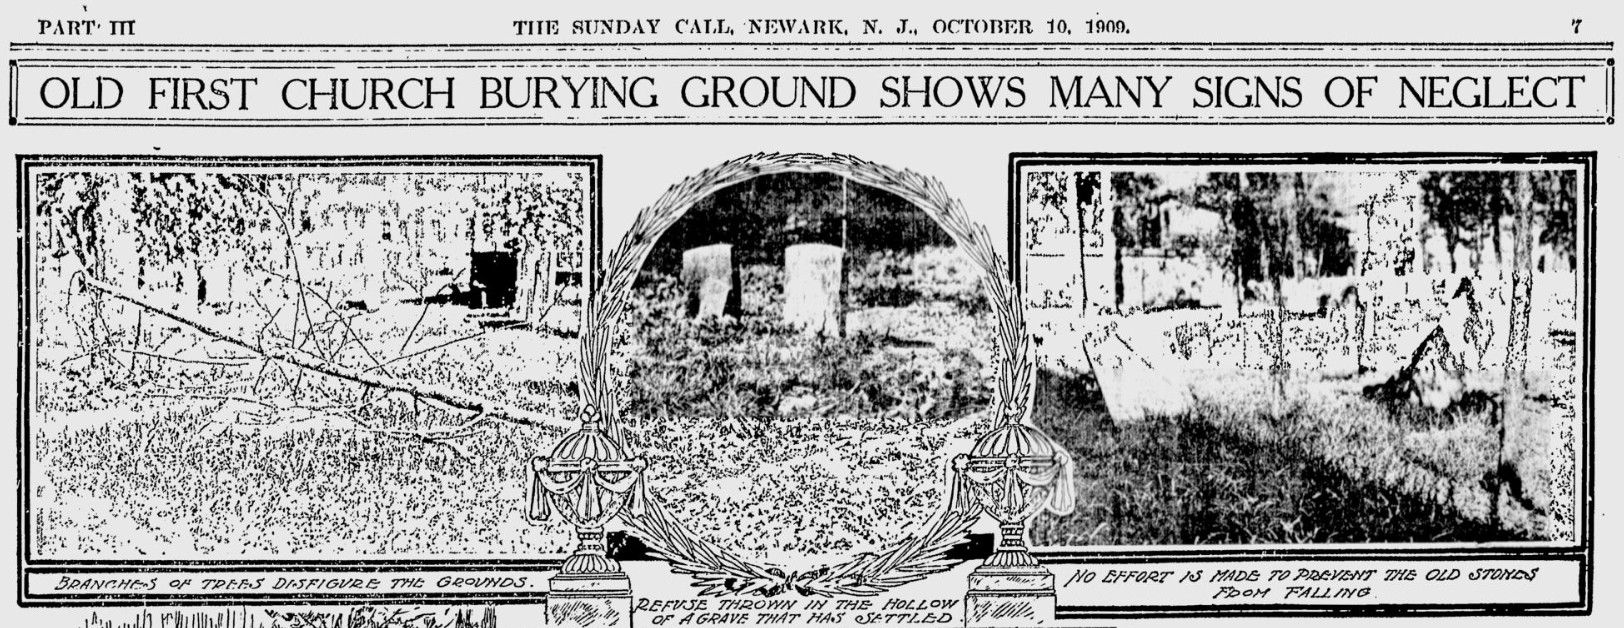 Old First Church Burying Ground Shows Many Signs of Neglect
1909
